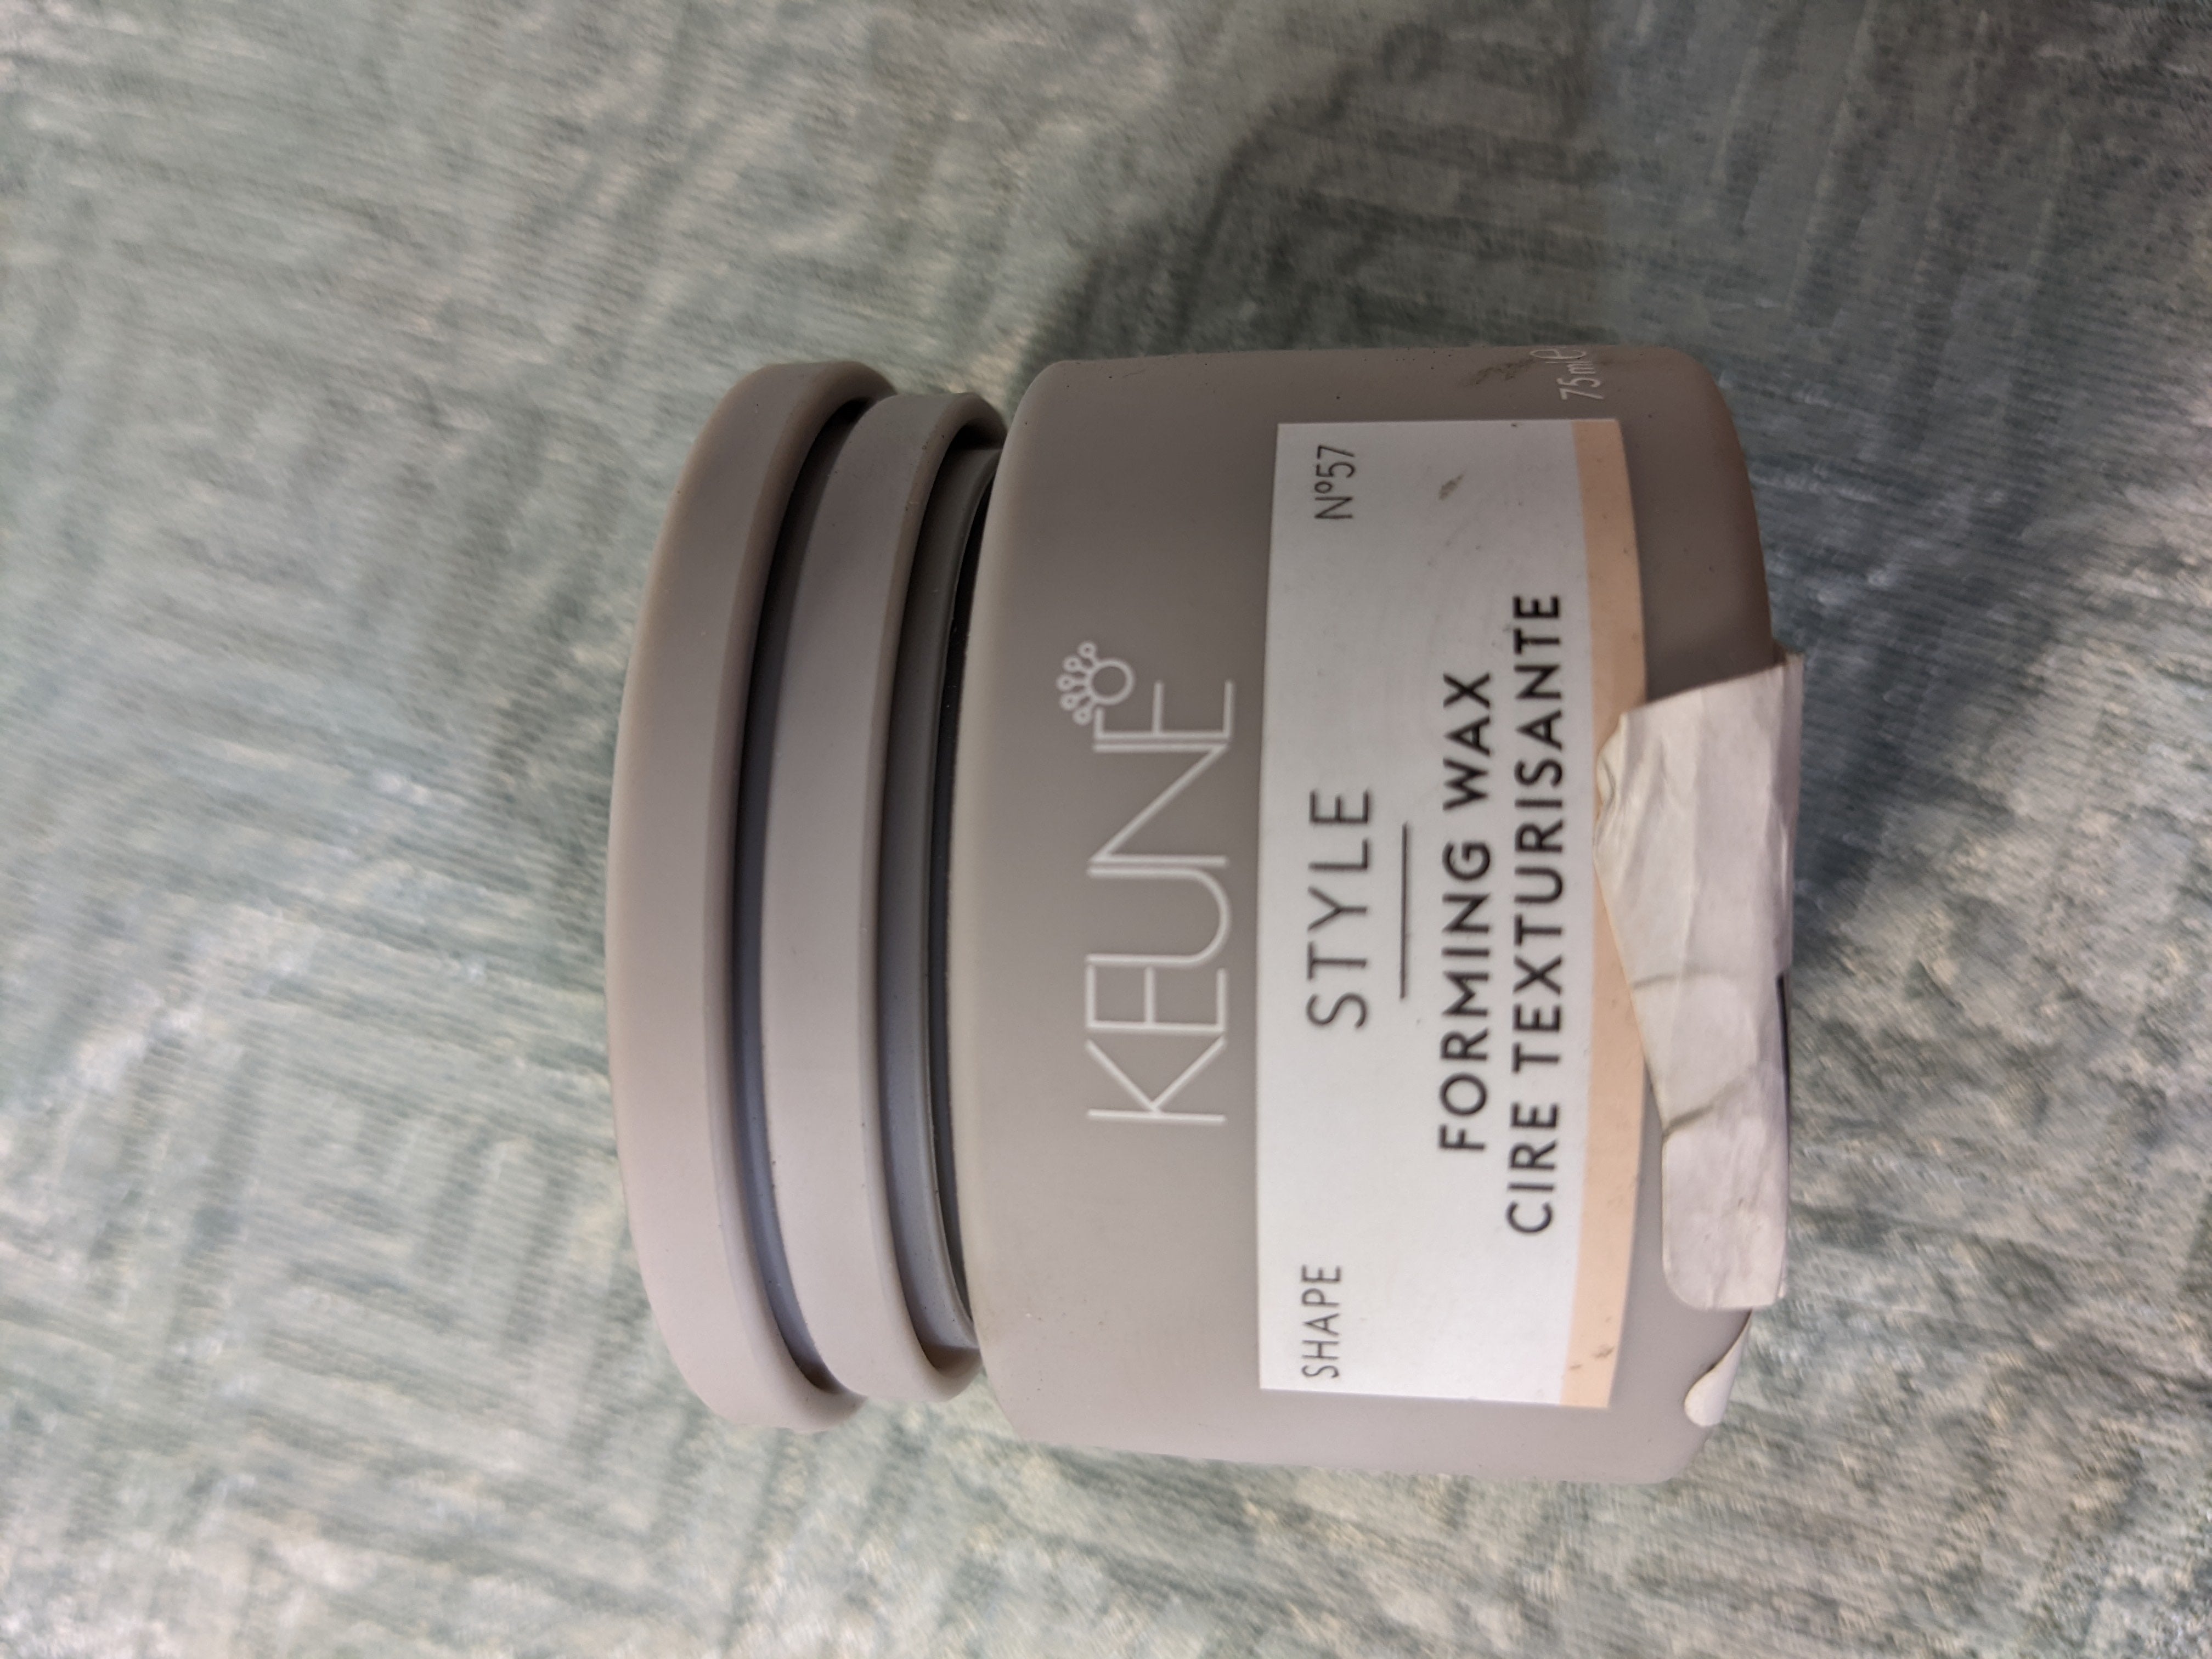 KEUNE Style Forming Wax For Hold and Shine, 2.5 Oz. (7495985463534)